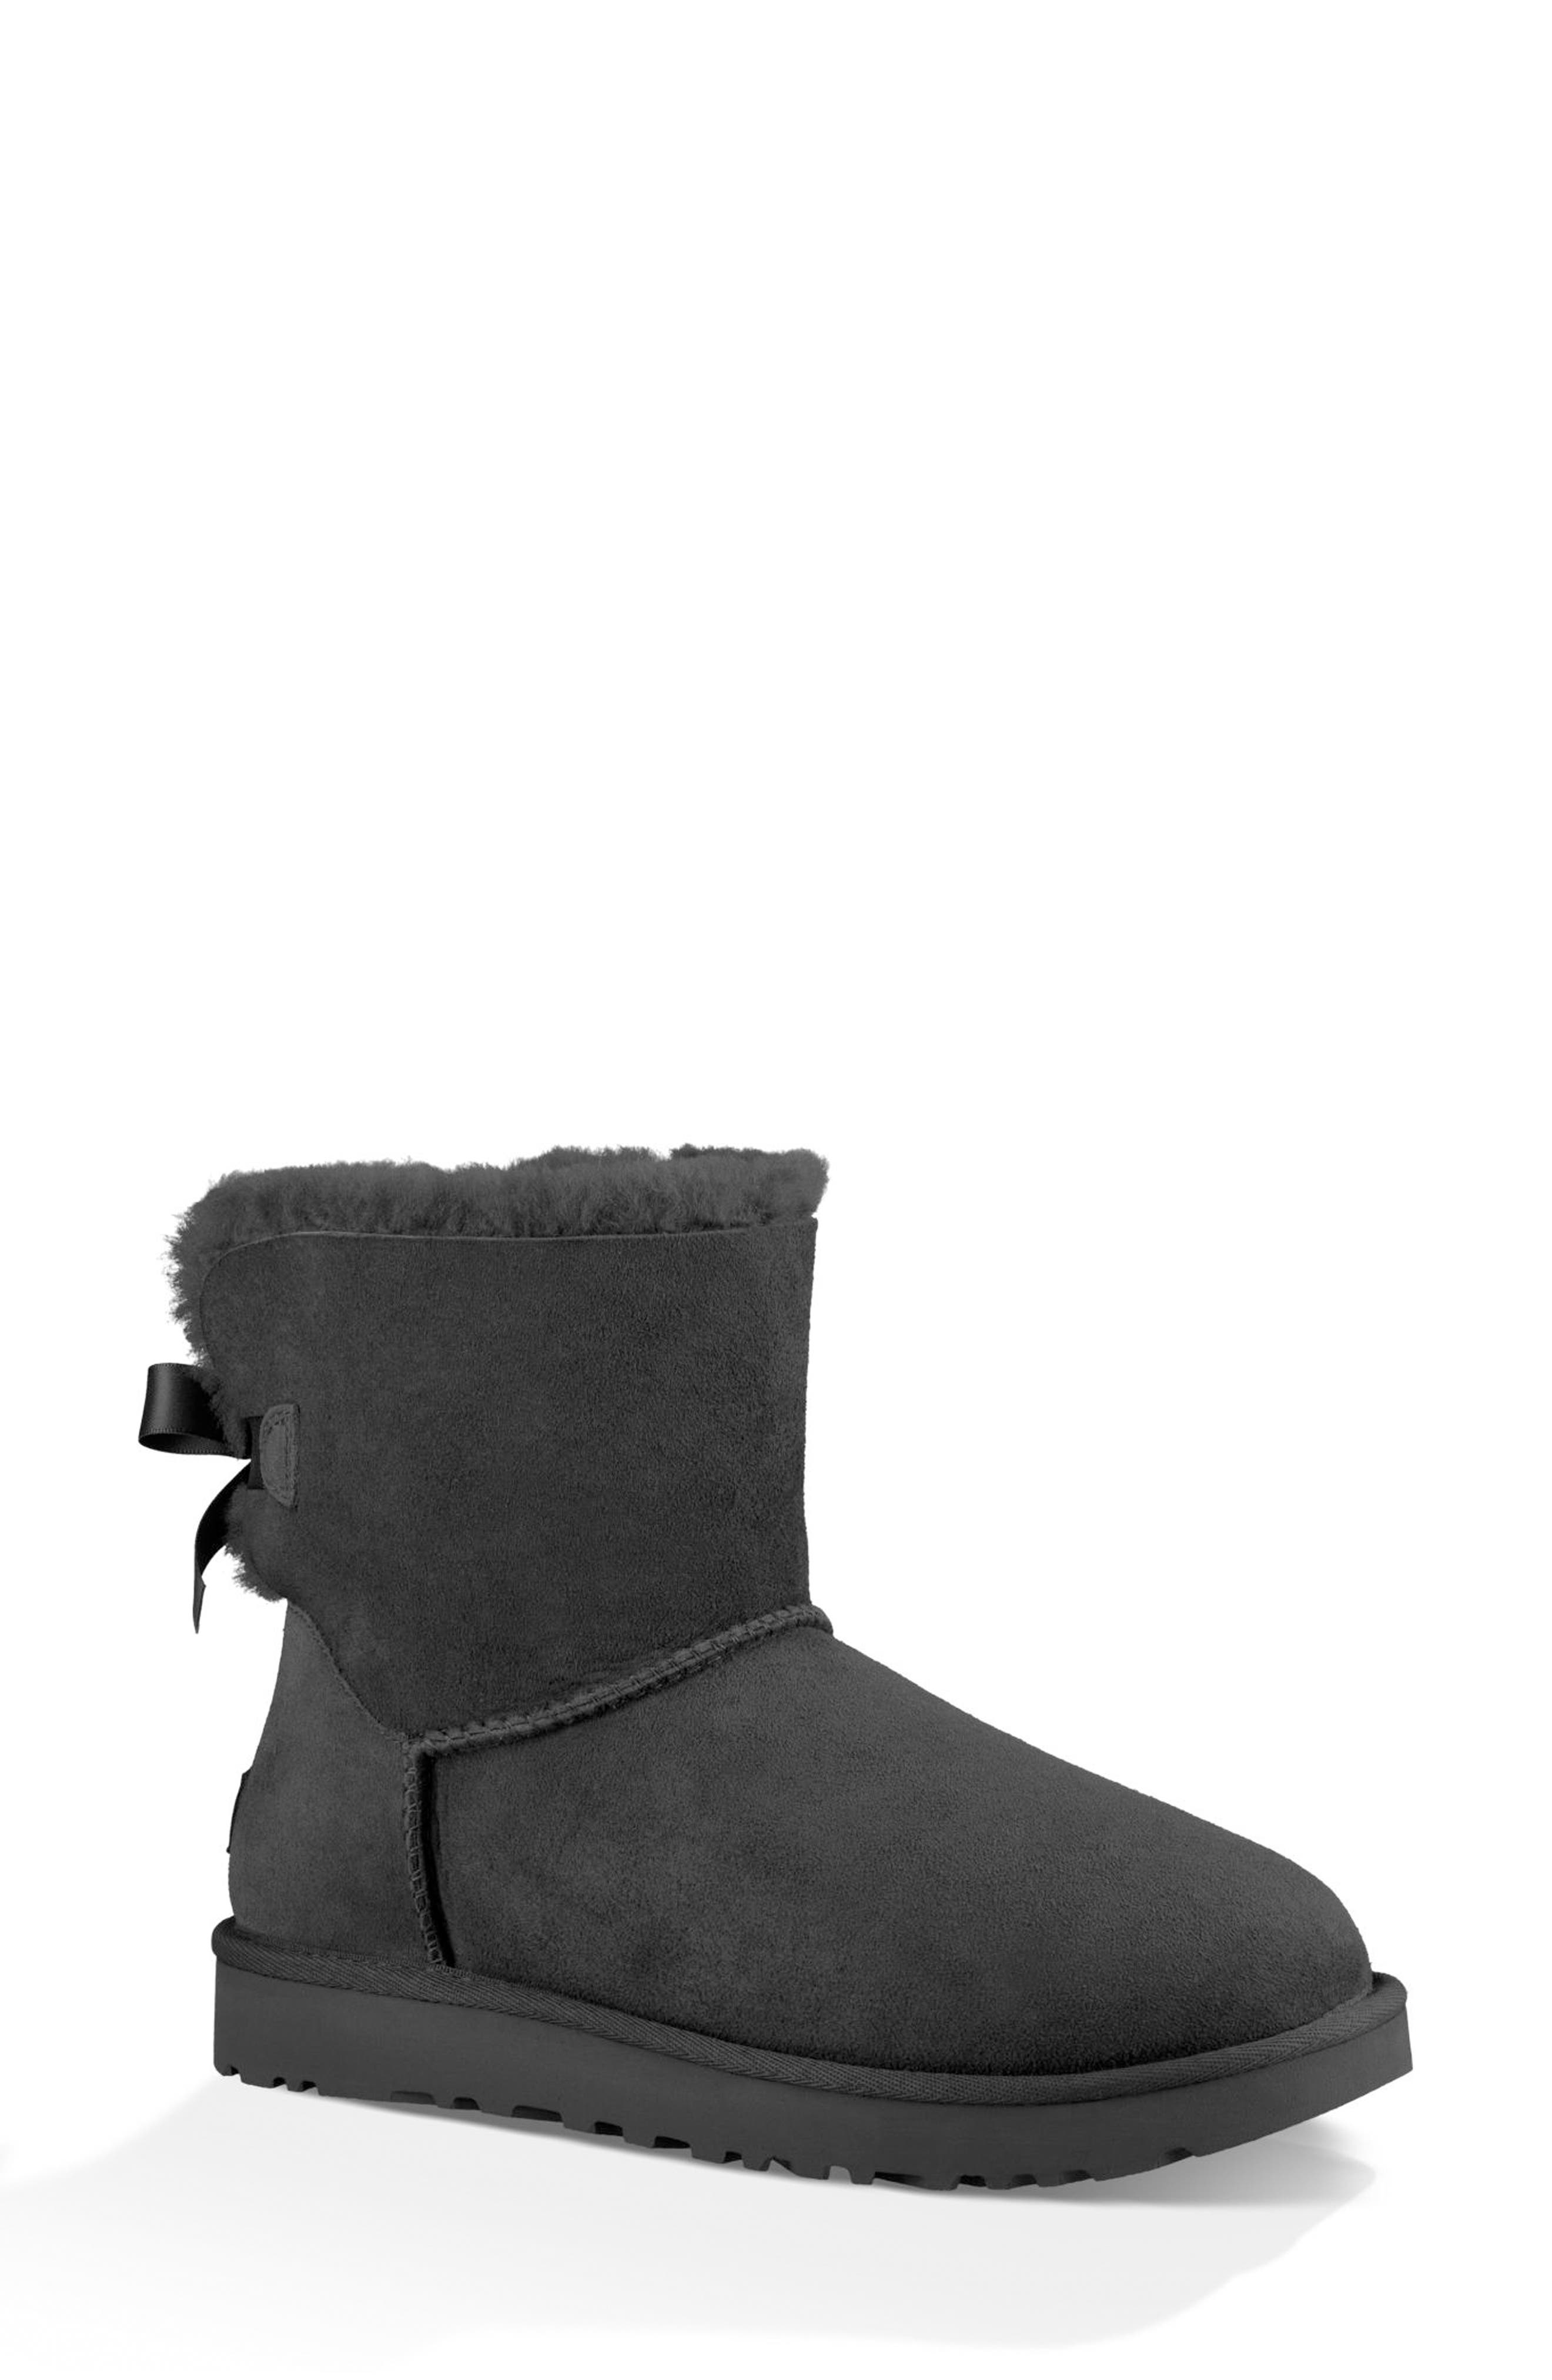 womens ugg boots nordstrom